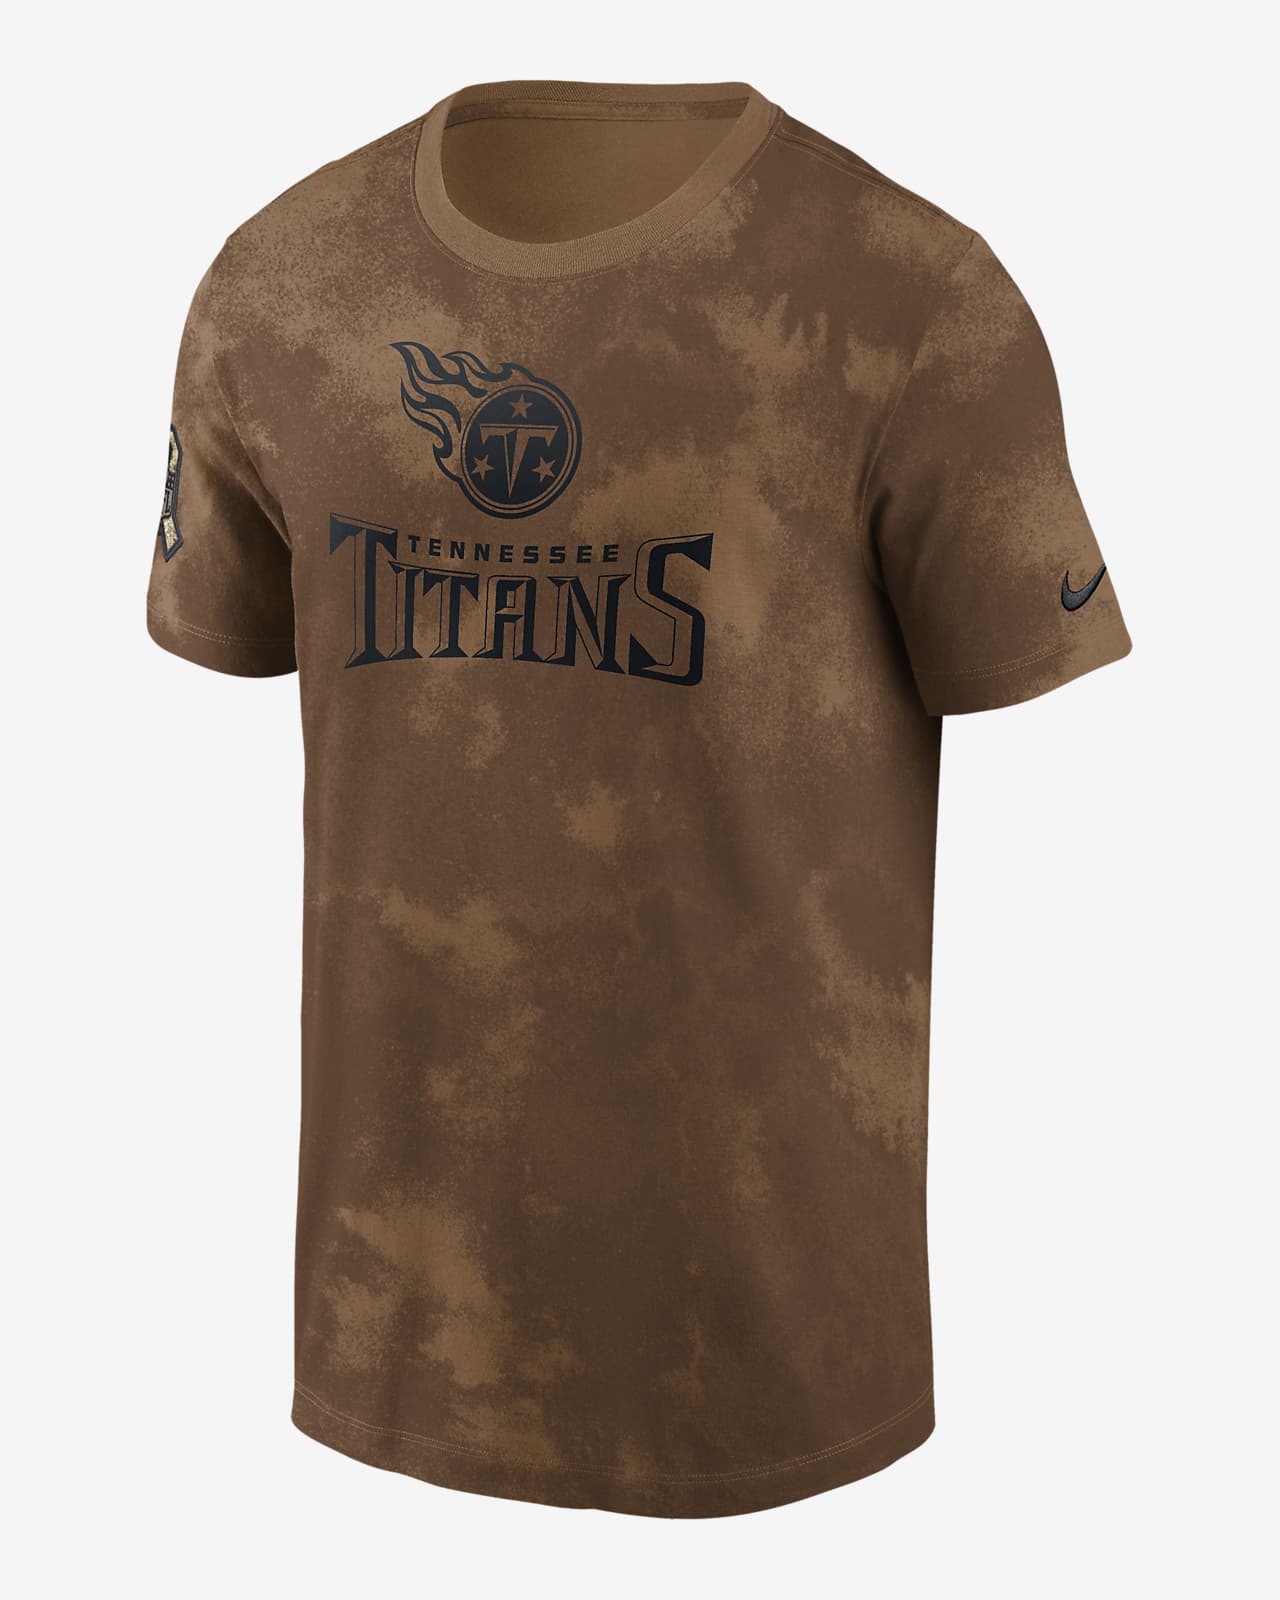 Tennessee Titans Salute to Service Sideline Men's Nike NFL T-Shirt